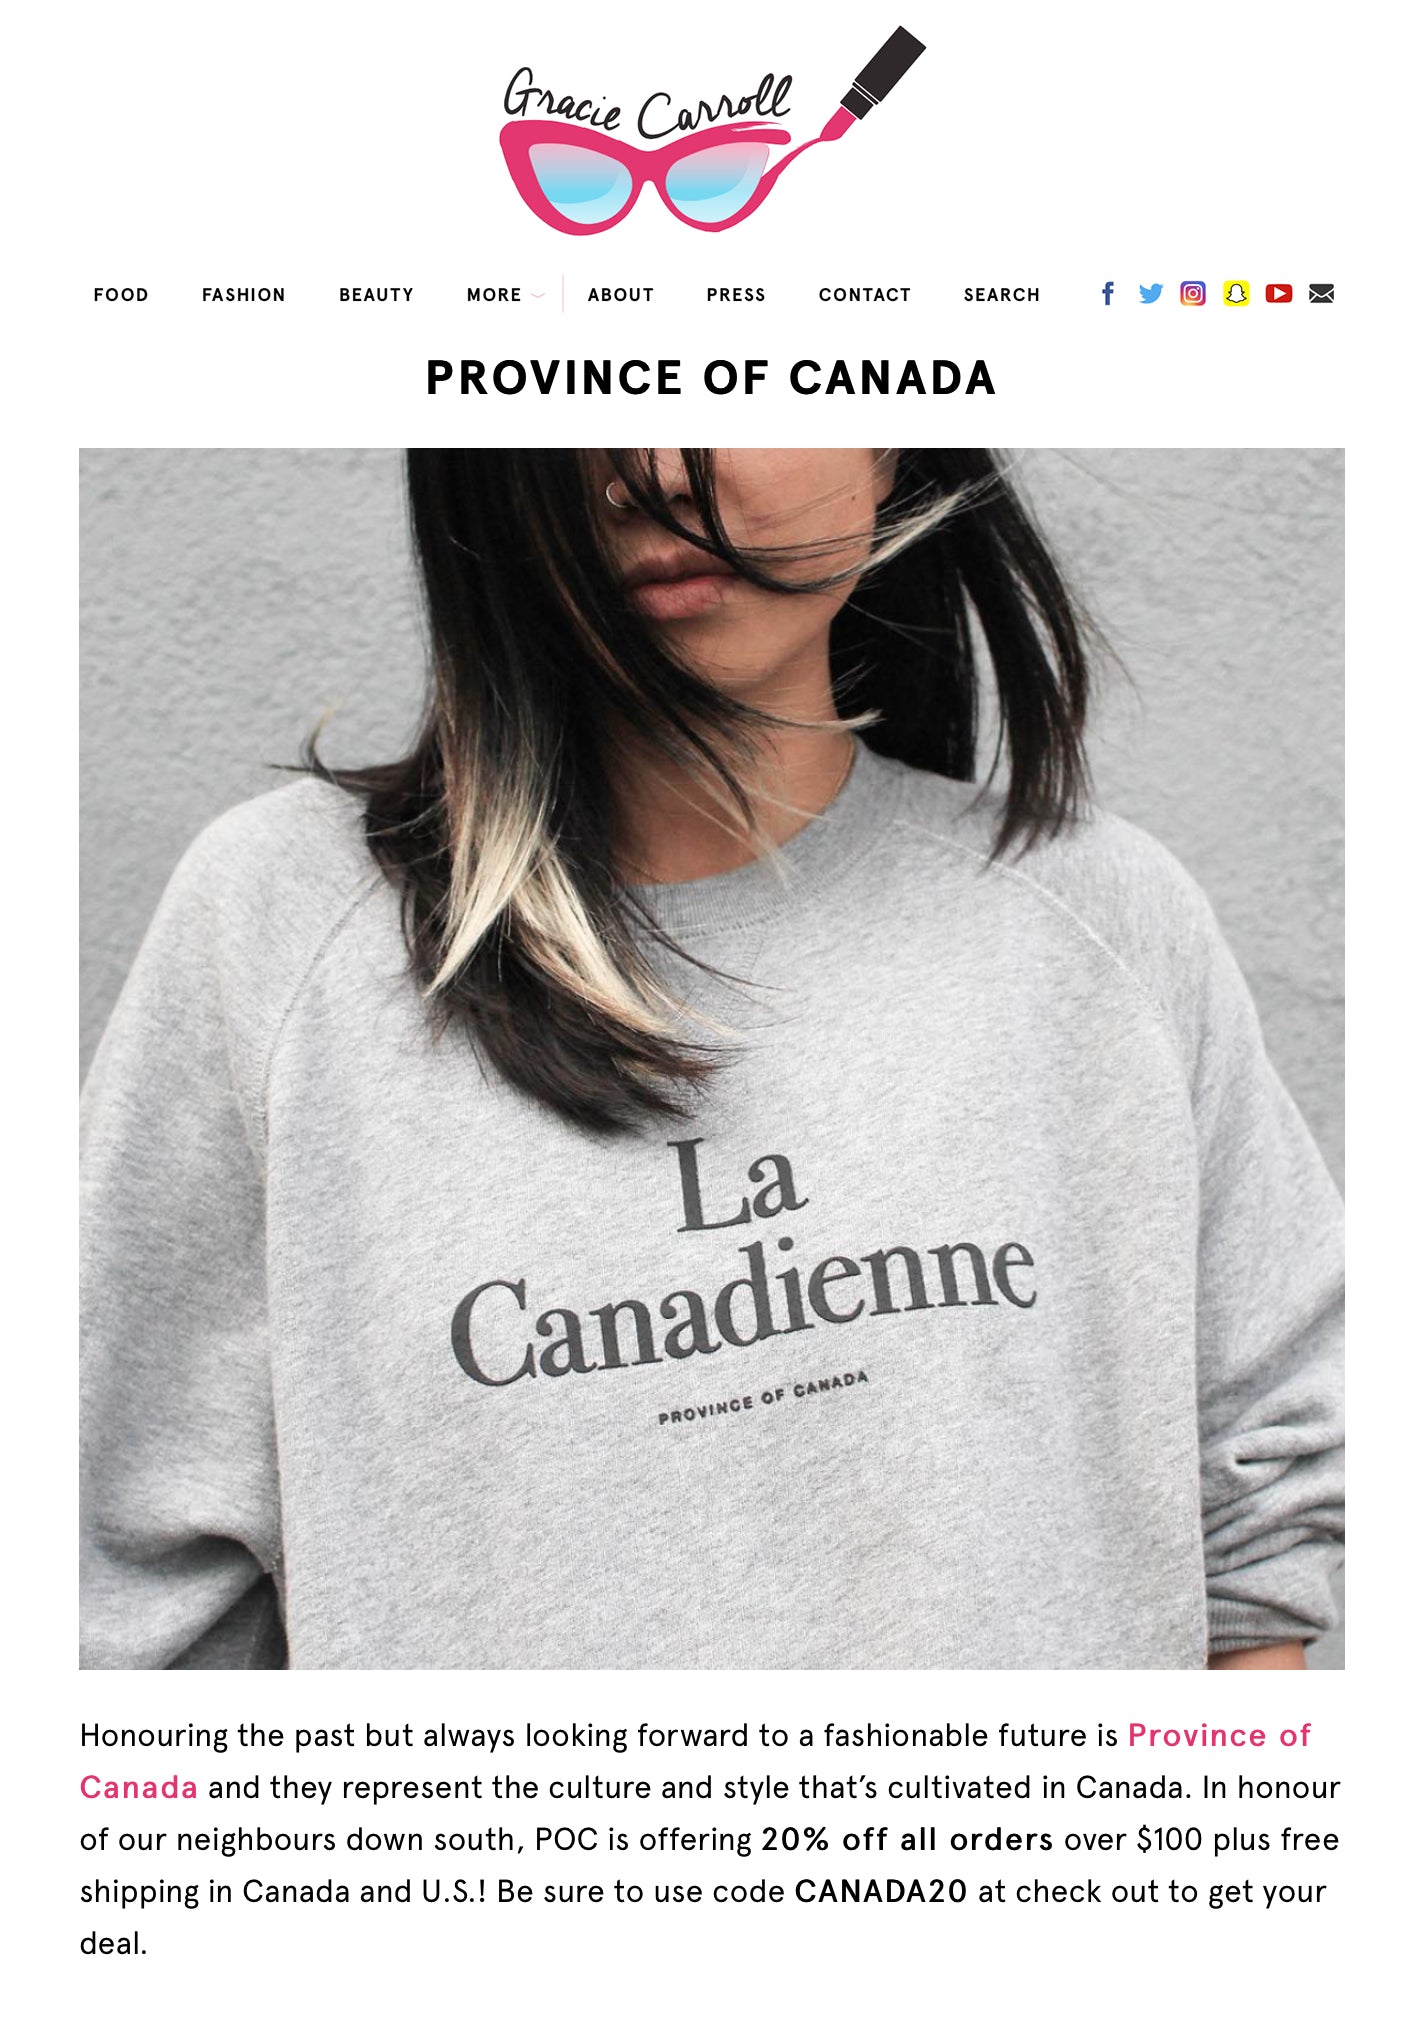 Province of Canada - Gracie Carroll Feature